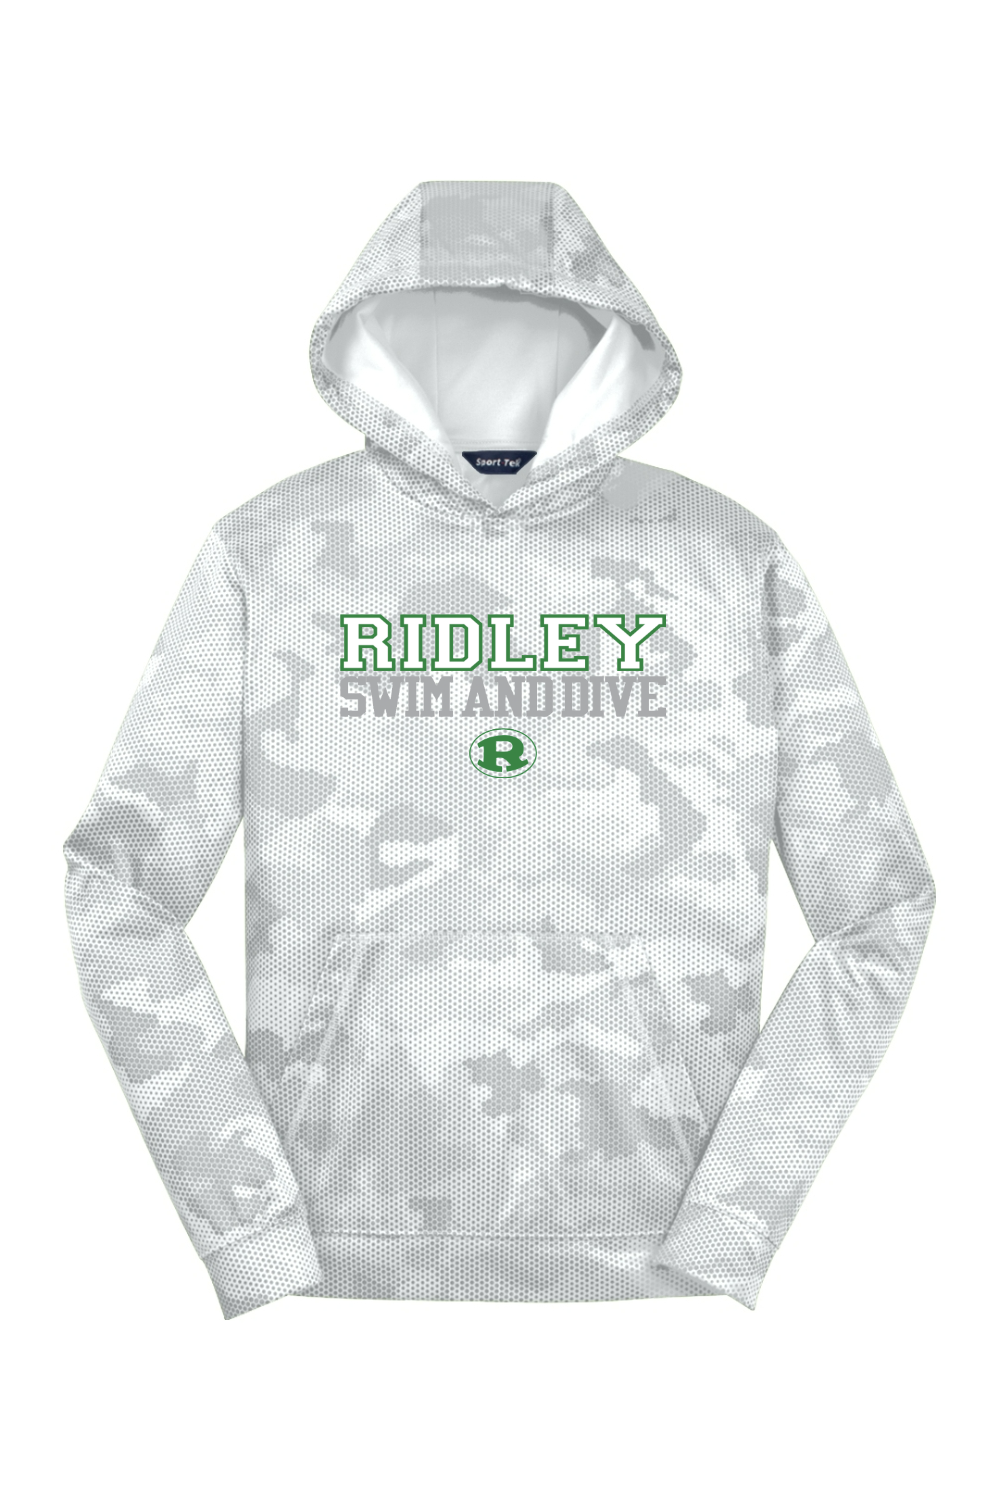 Ridley Swim and Dive Youth Sport-Tek Sport-Wick CamoHex Fleece Hooded Pullover